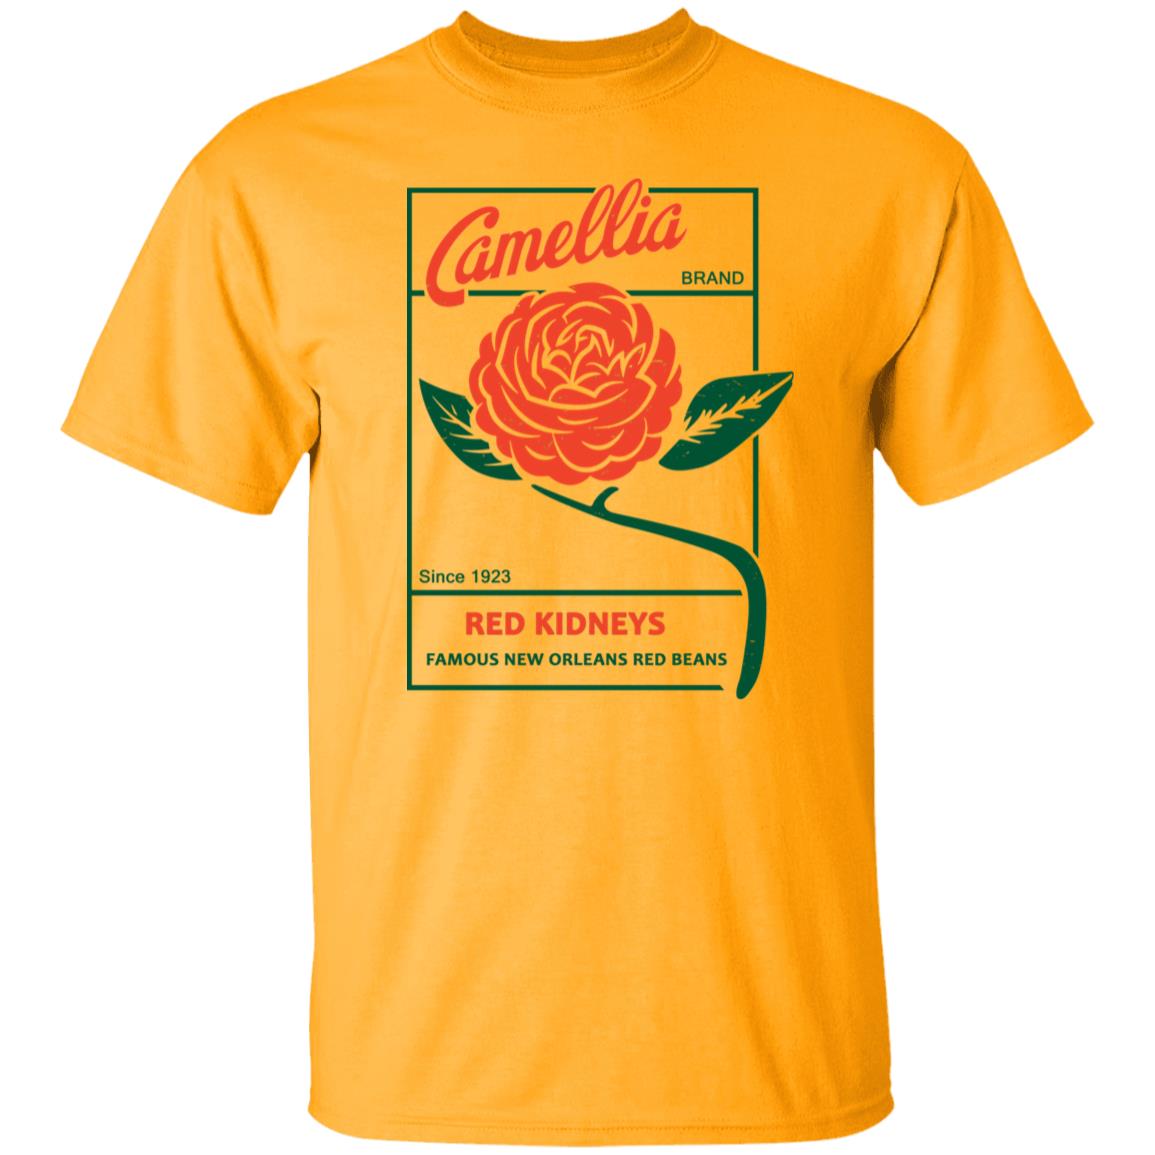 Camellia Brand Since 1923 Red Kidneys Shirt Hold The Mayo